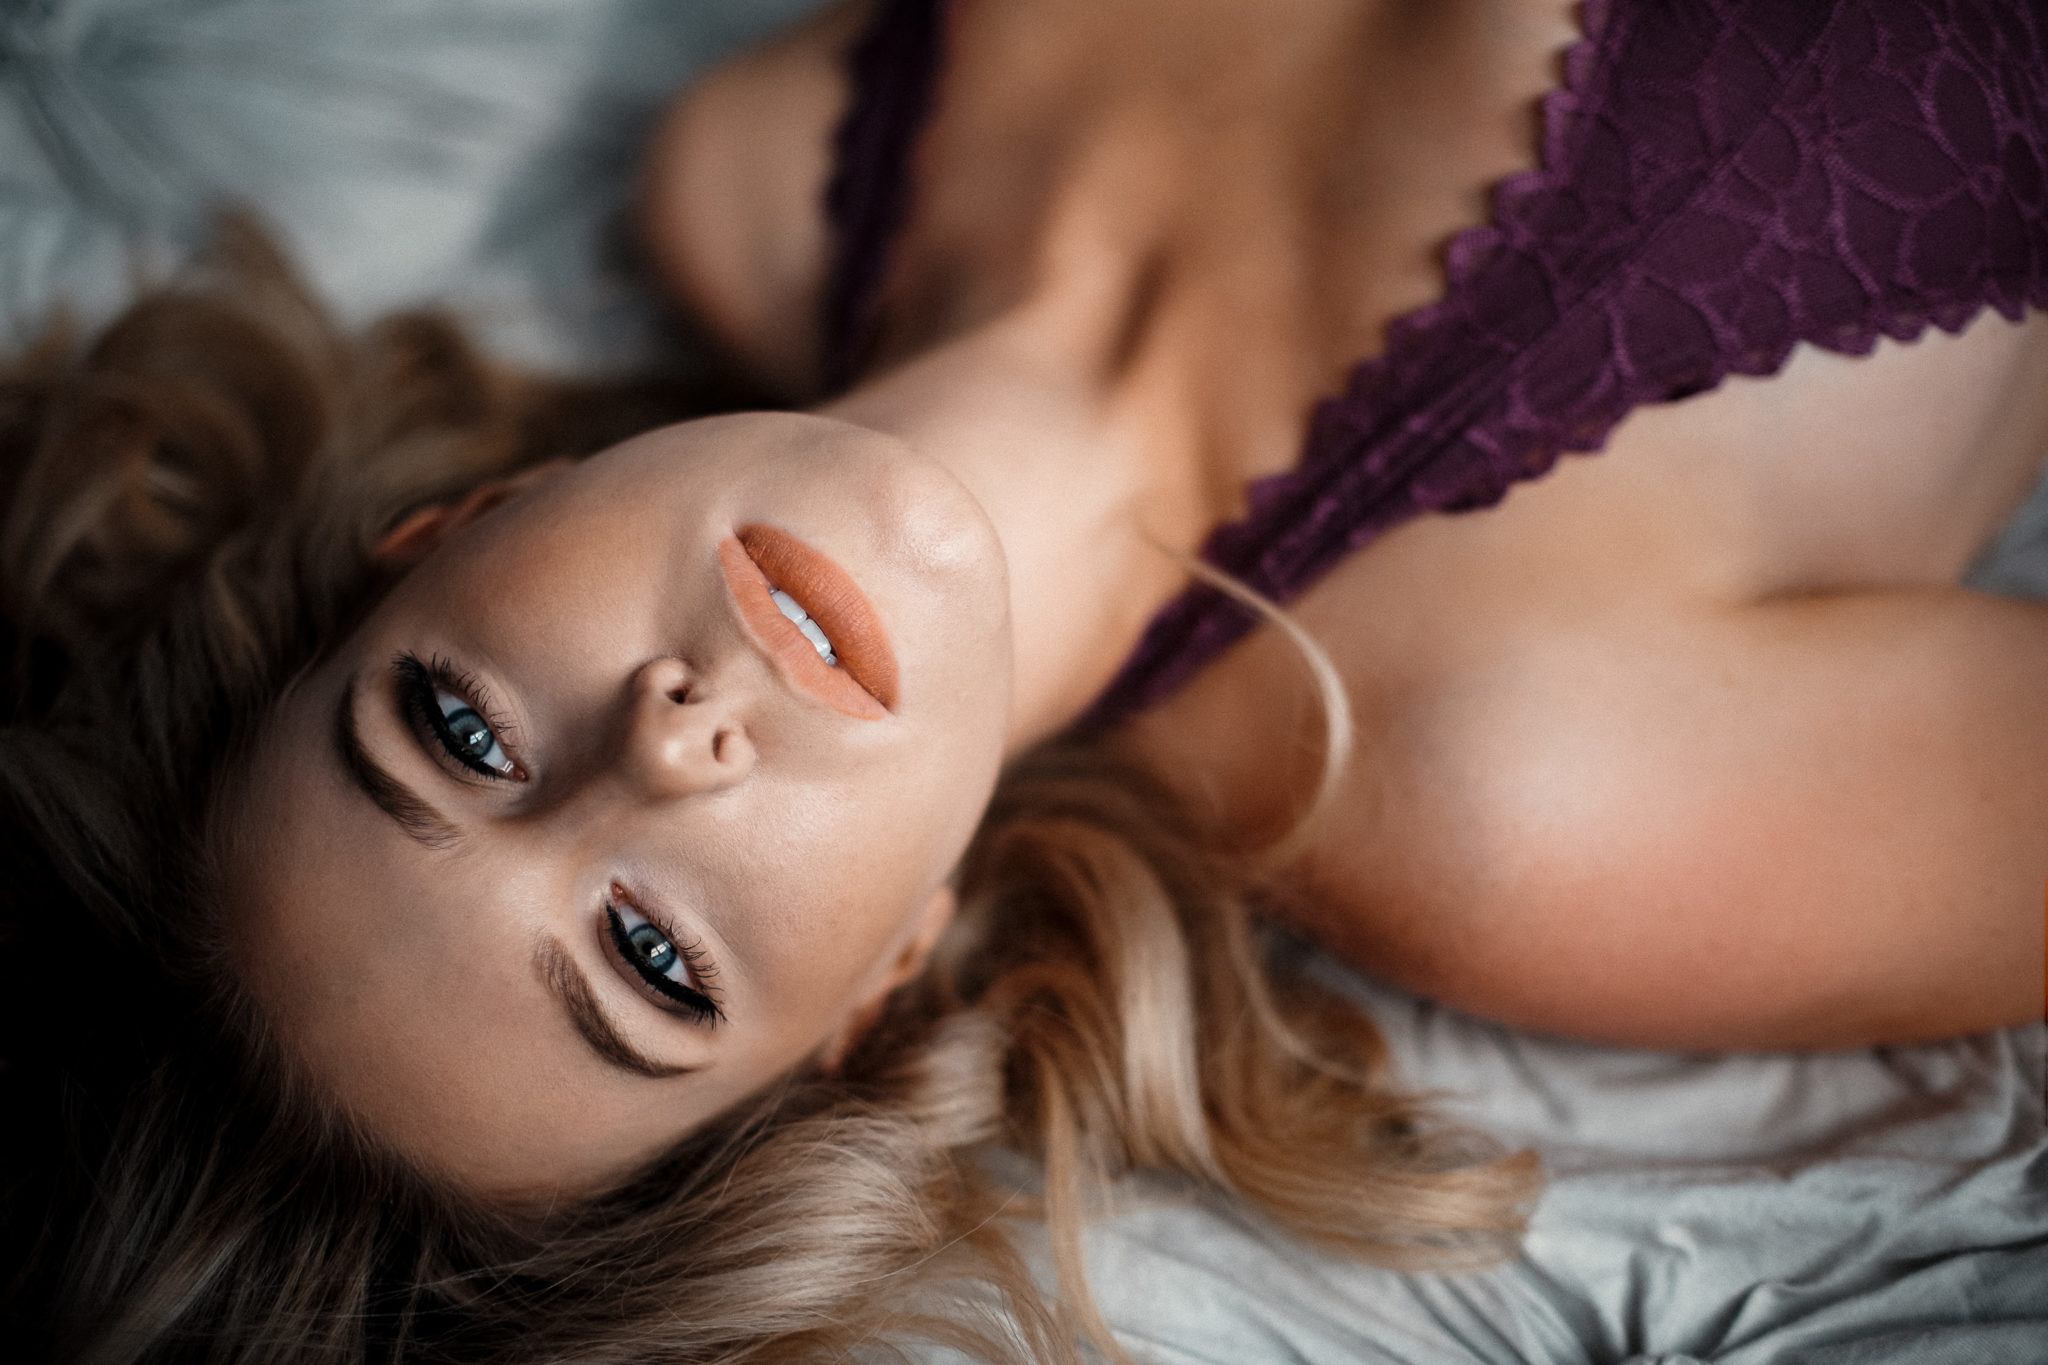 3 Great Lenses We’ve Used for Boudoir Photography